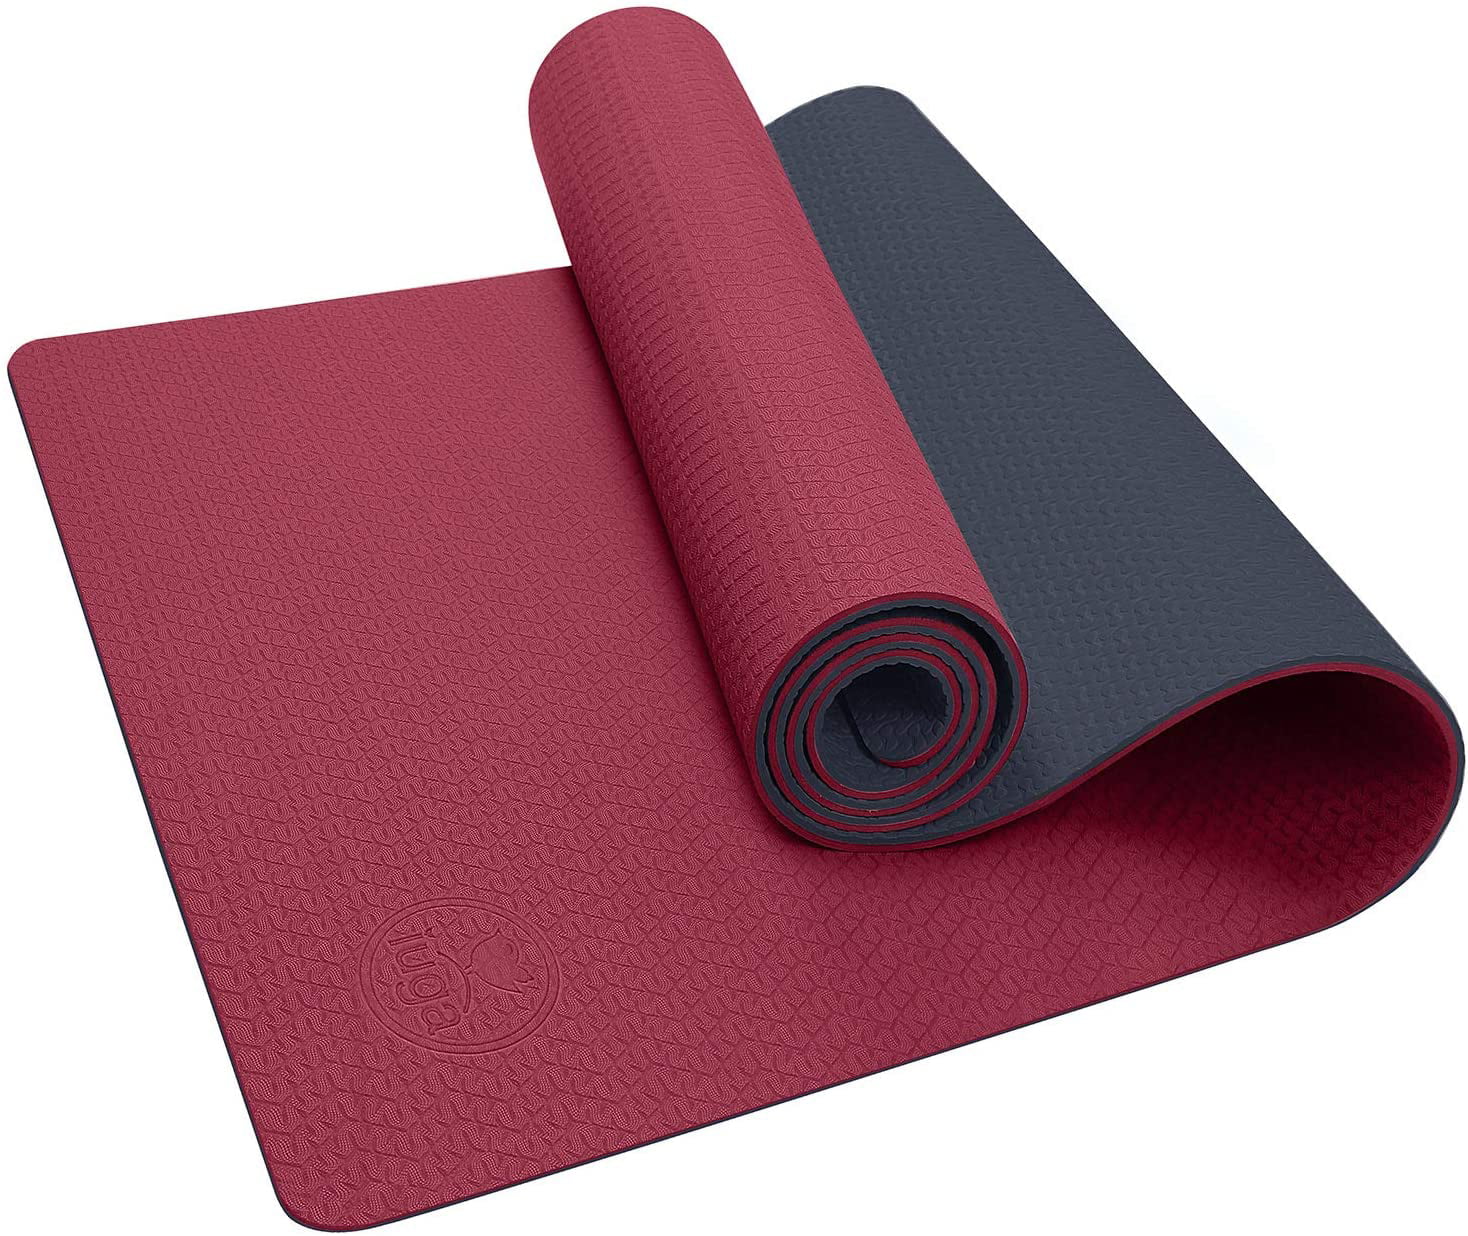 Large Soft Yoga Mat Nonslip Outdoor Pilates Fitness Exercise Carry Strap 72"*24" 